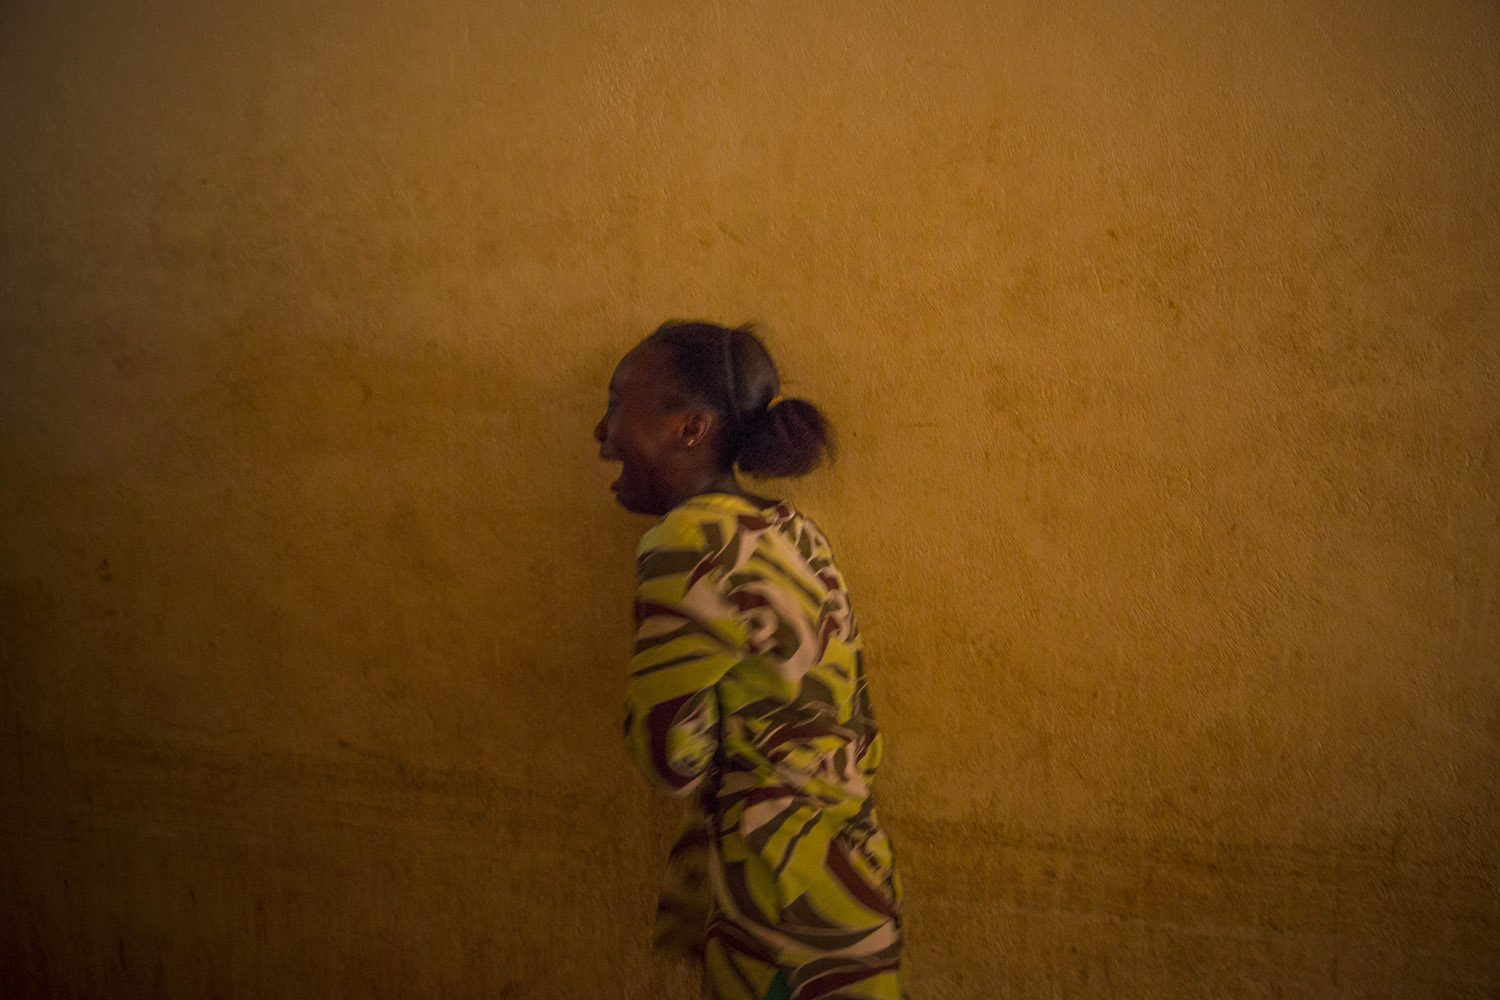 A relative cry the death of a military who was shot dead by Seleka members the night before. Bangui.